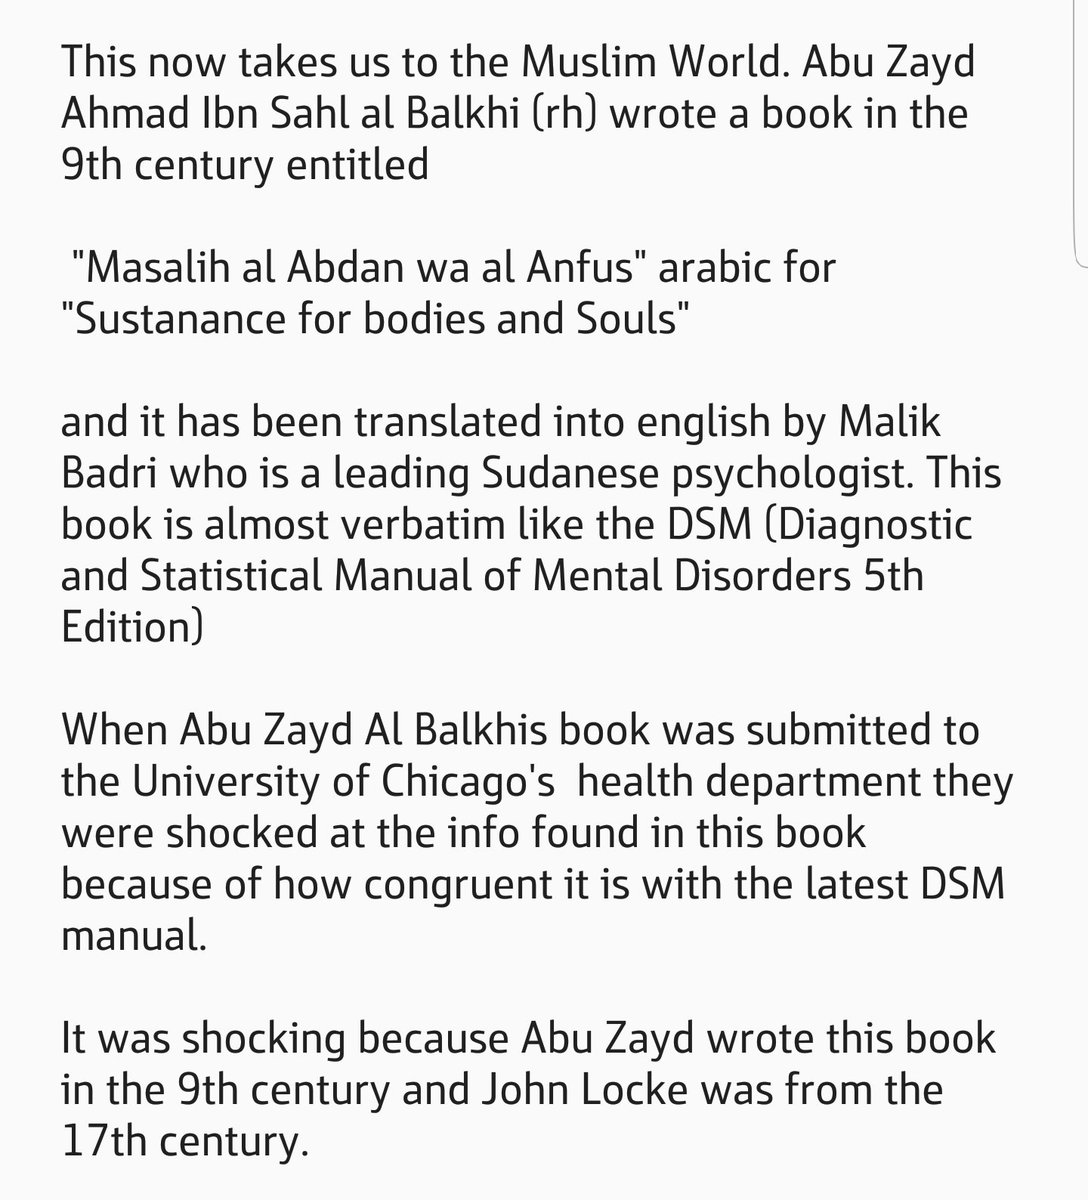 6) This now takes us to the Muslim WorldAbu Zayd Ahmad Ibn Sahl al Balkhi (rh) wrote a book in the 9th century: